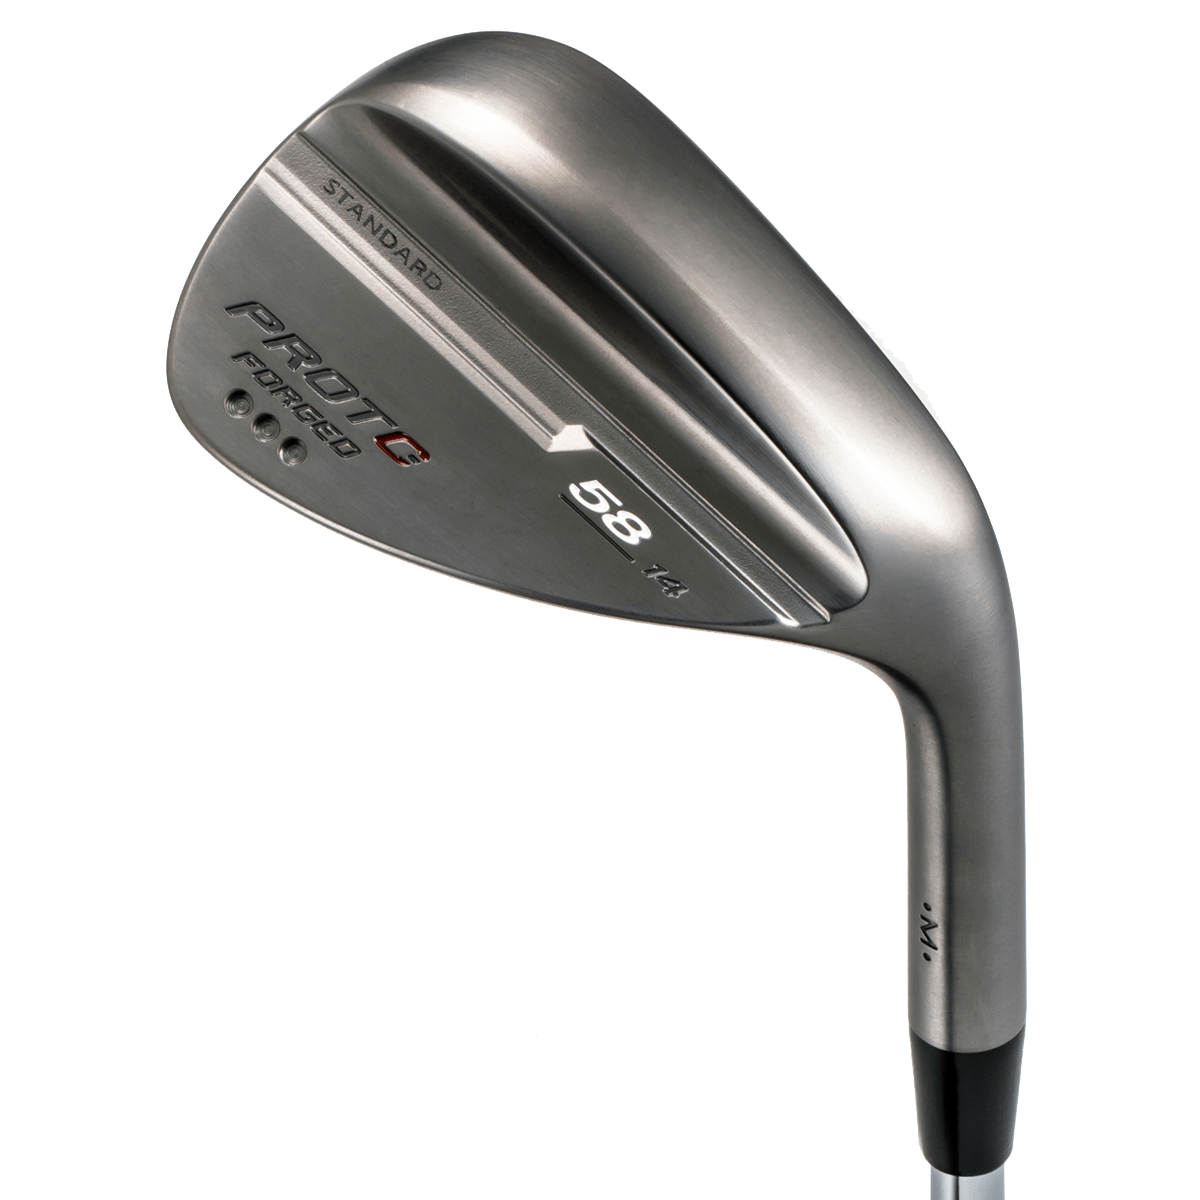 PROTOCONCEPT Golf, Forged Wedge - 32